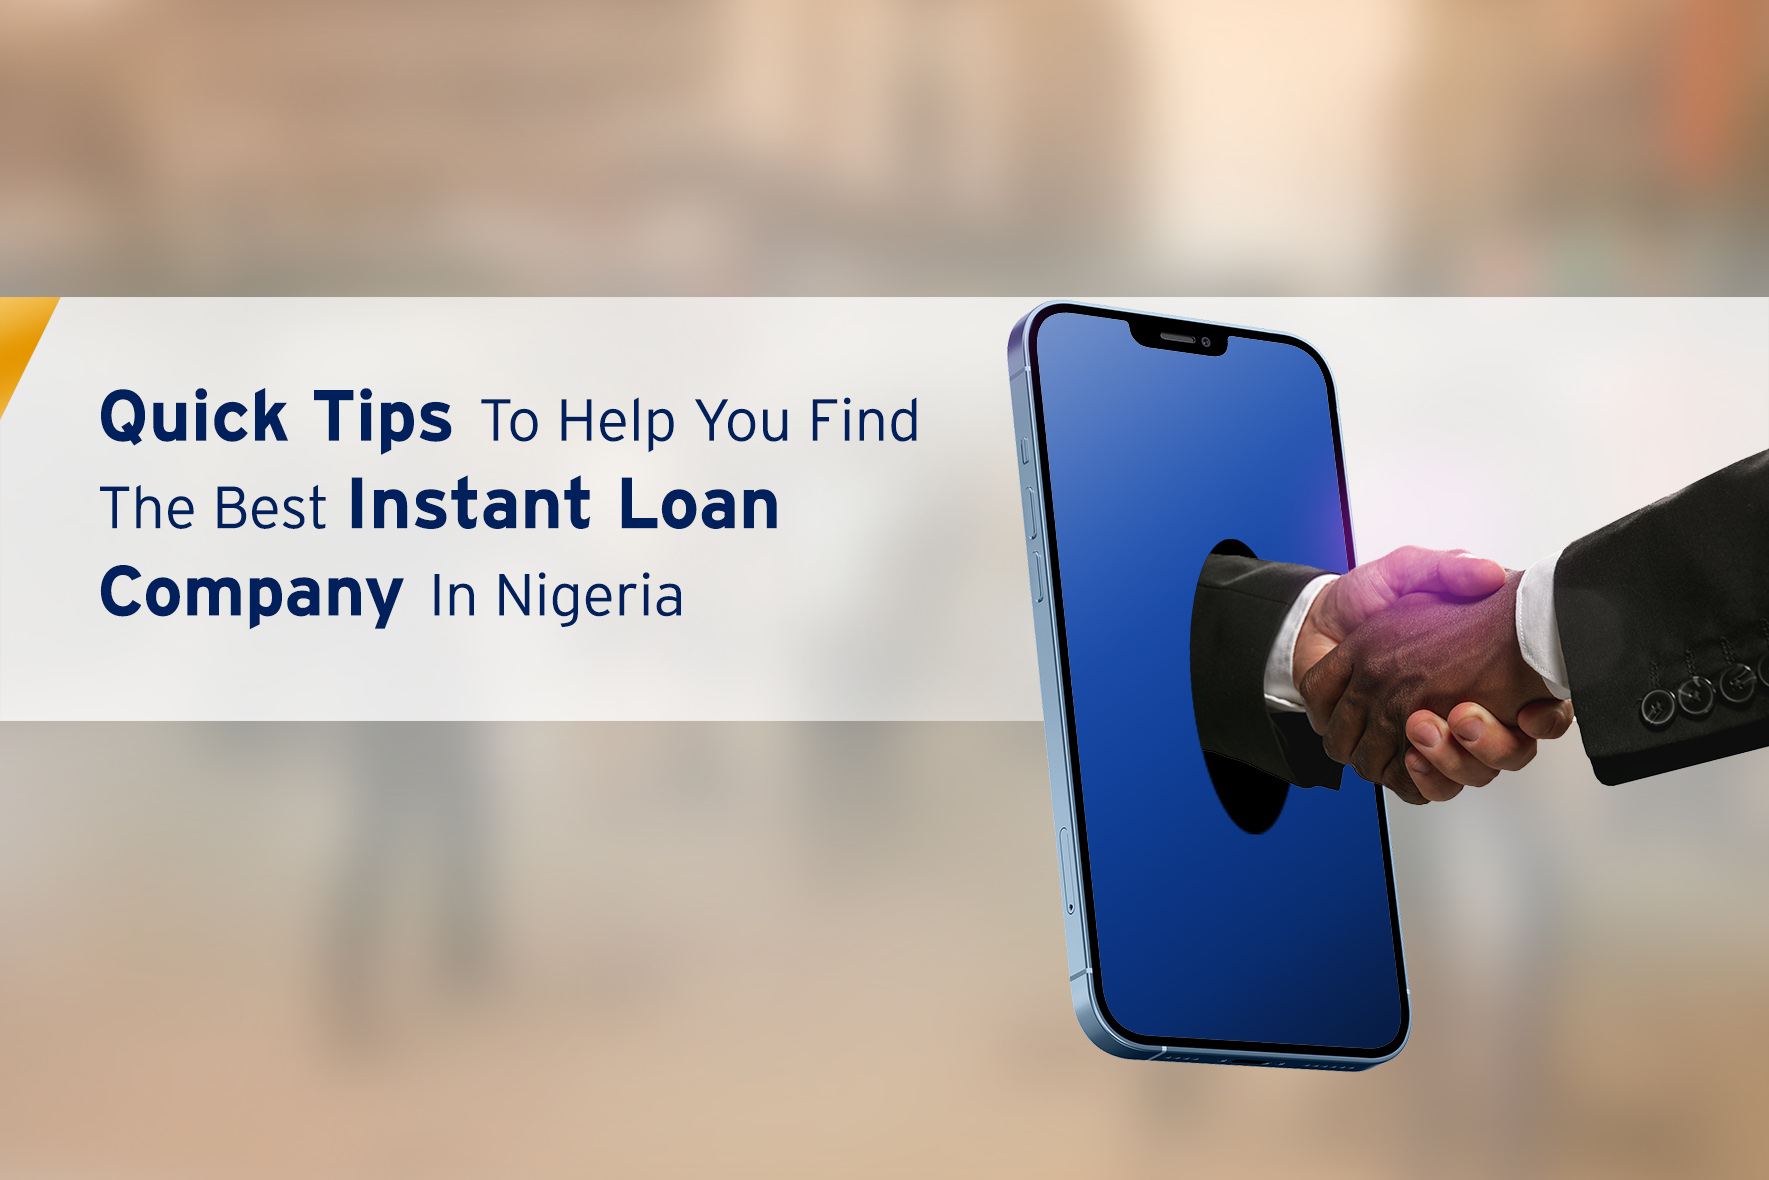 Quick Tips to Help You Find the Best Instant Loan Company in Nigeria